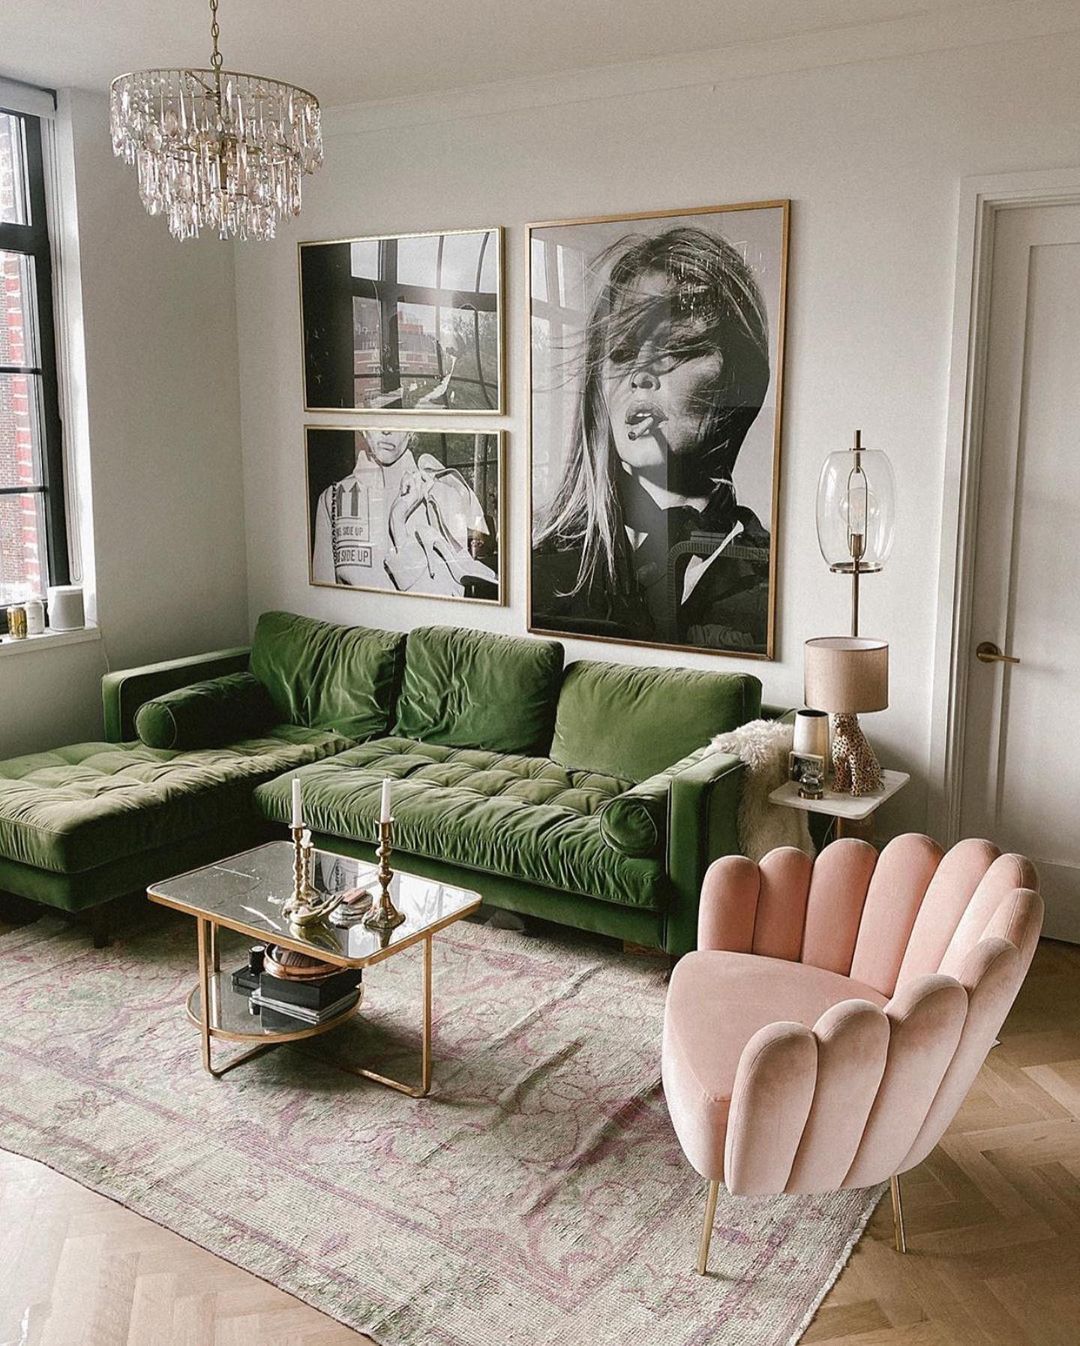 Add Glamour with Statement Art and Pink Accents